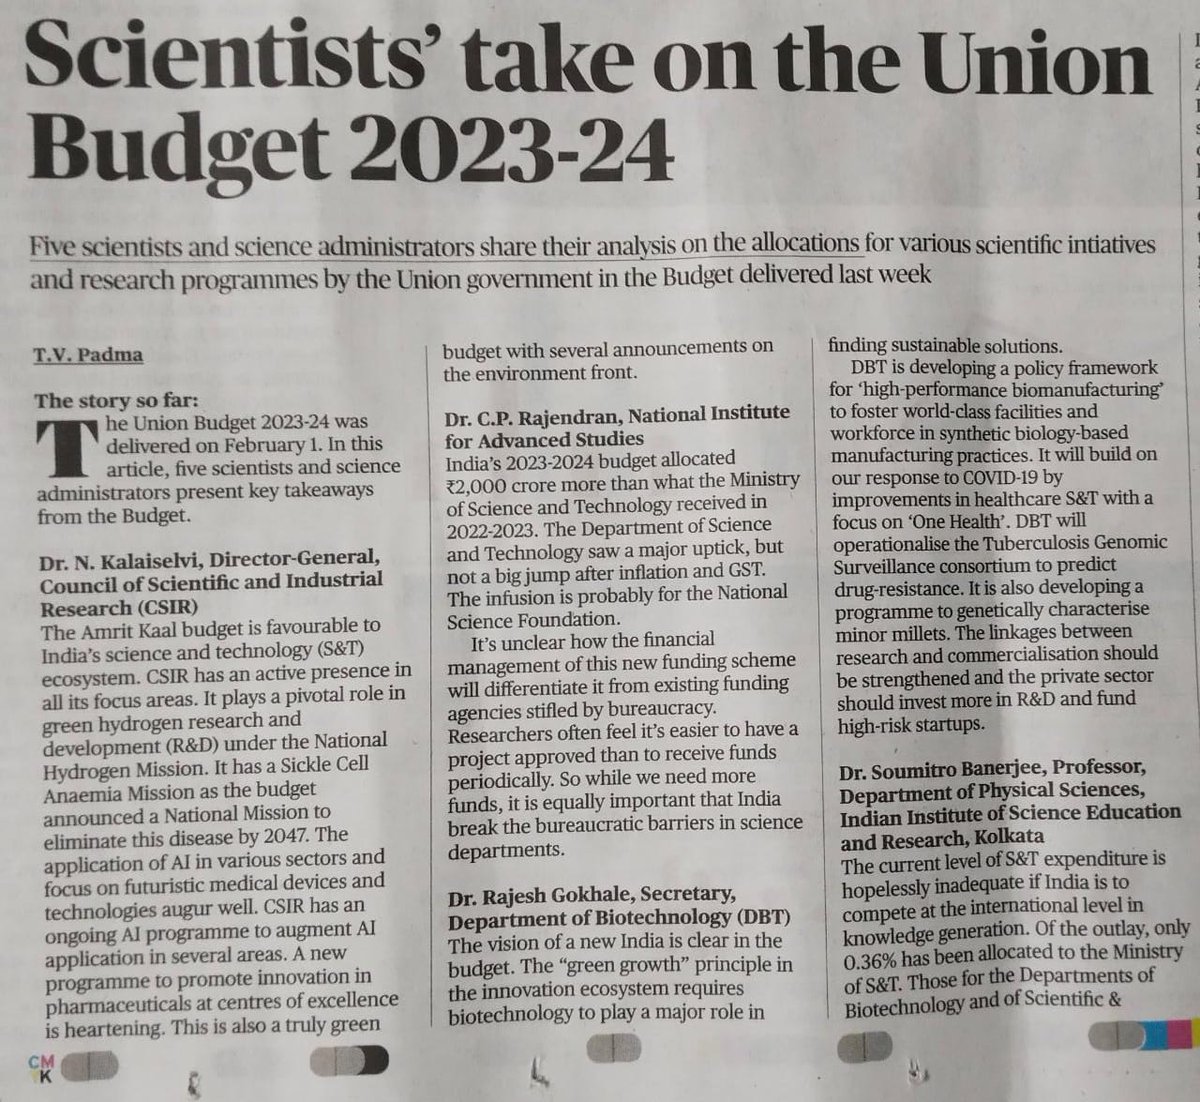 .Union Budget for 2023 - 24: @rajesh_gokhale Secretary @DBTIndia says the department is developing a policy framework for 'High-Performance Biomanufacturing' to foster world-class facilities and workforce in synthetic biology-based manufacturing practices. @DrJitendraSingh